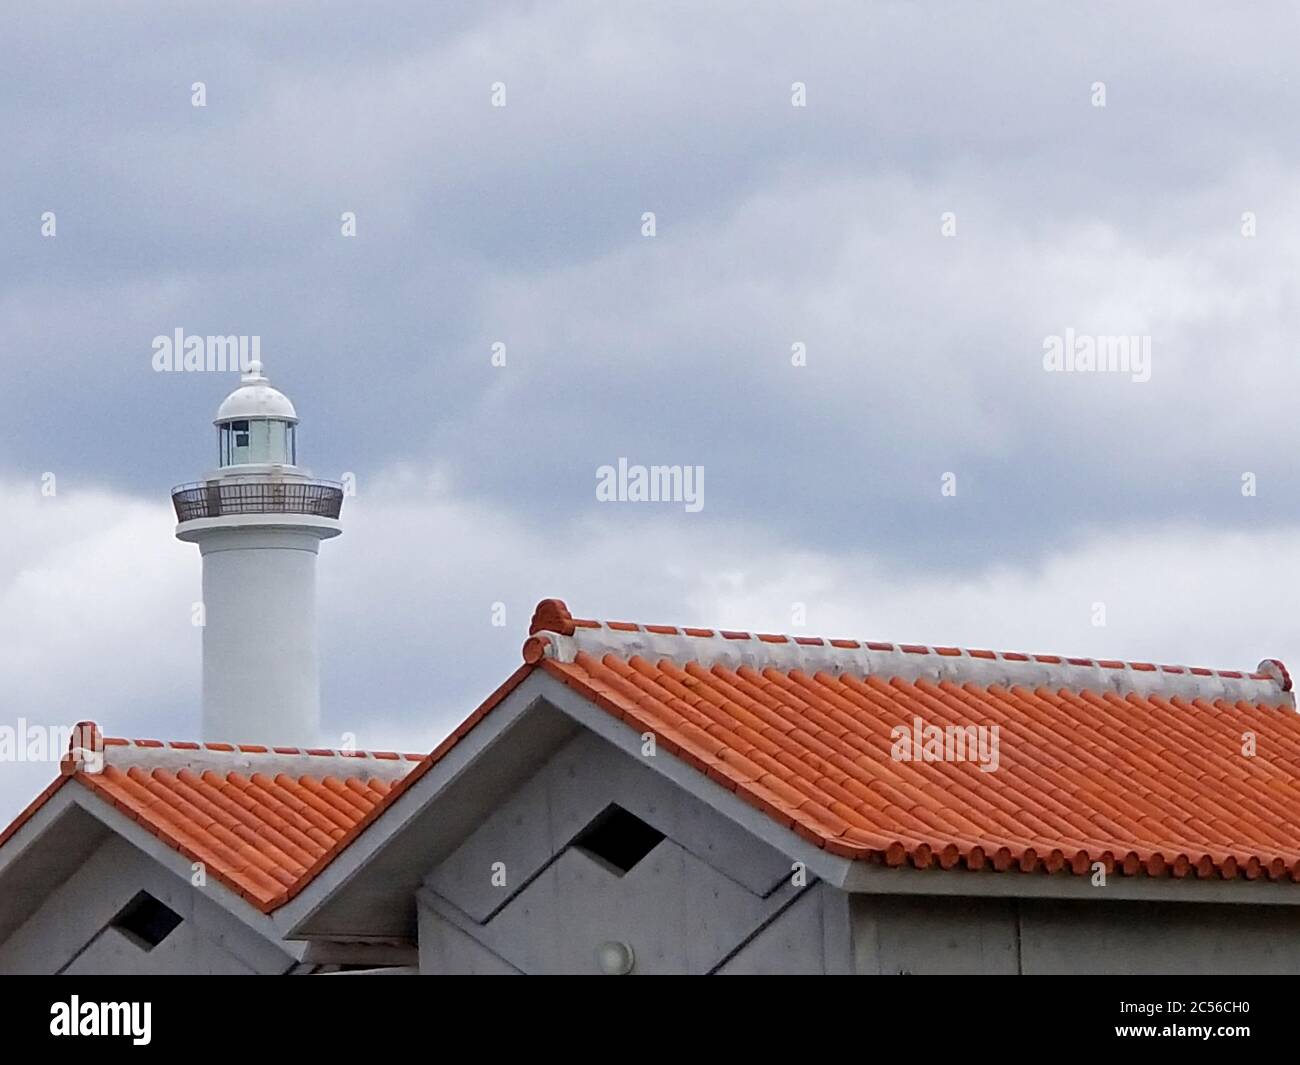 Cape Zanpa lighthouse and its adjascent red tiled roof buildings on a cloudy day in Okinawa, Japan Stock Photo